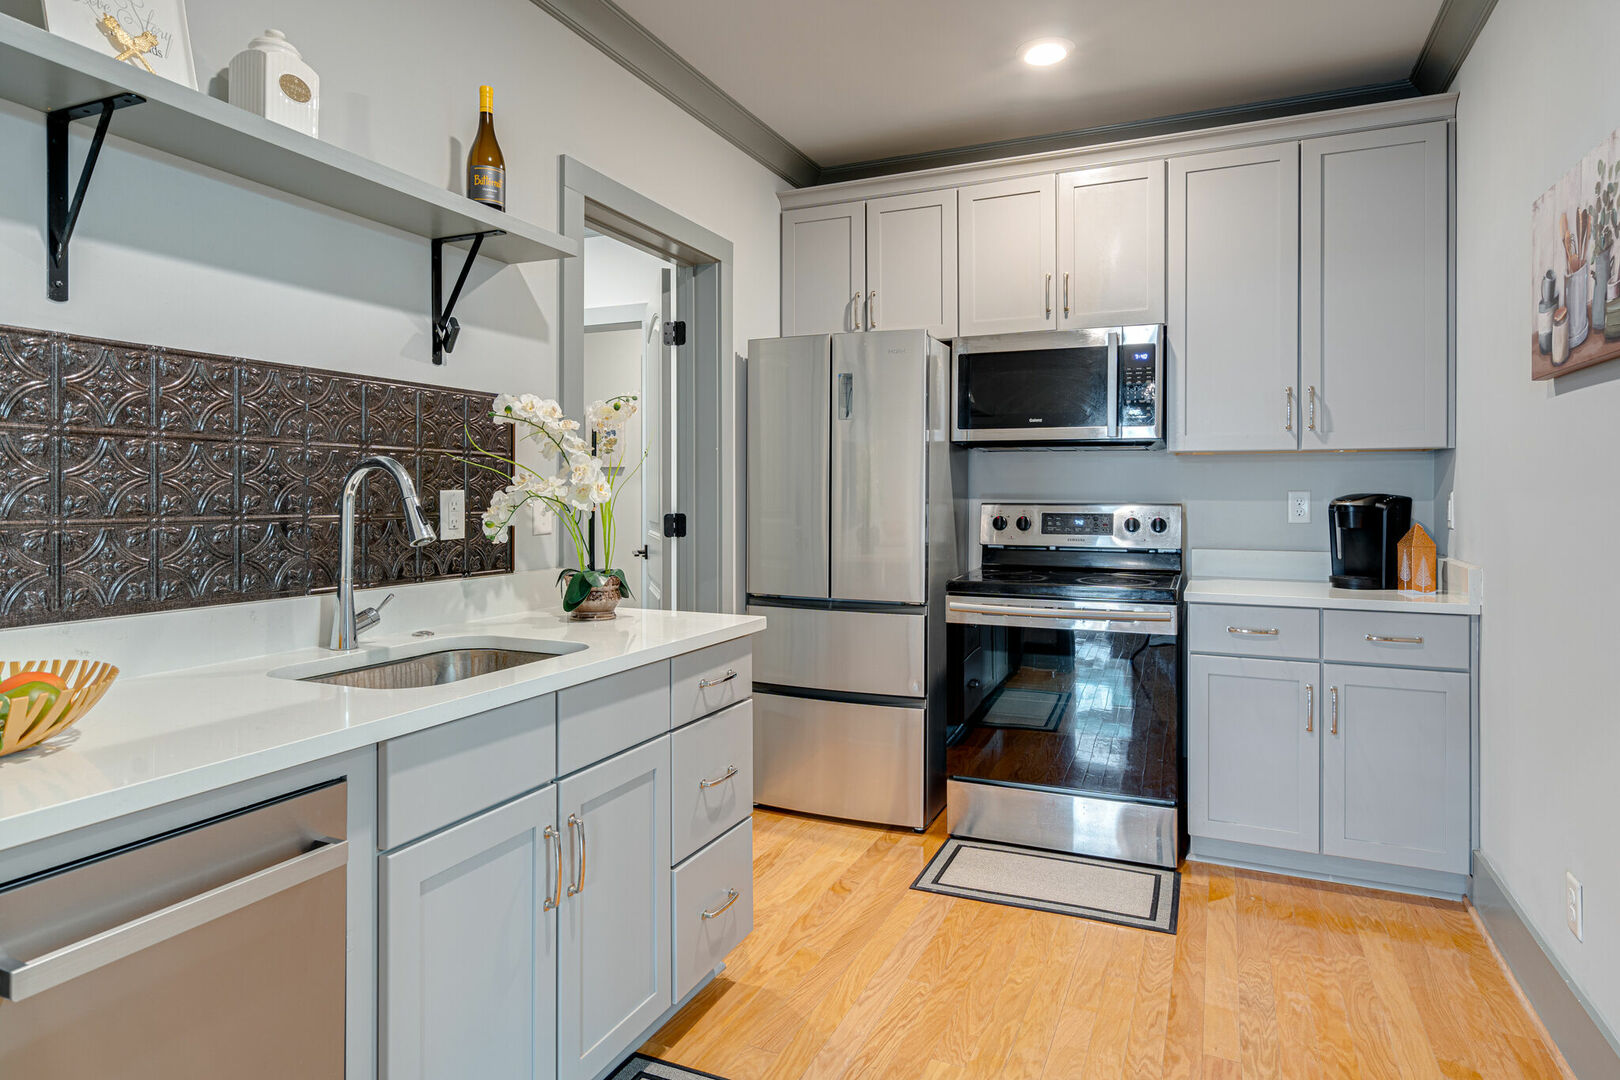 Fully equipped kitchen stocked with basic cooking essentials and stainless steel appliances.